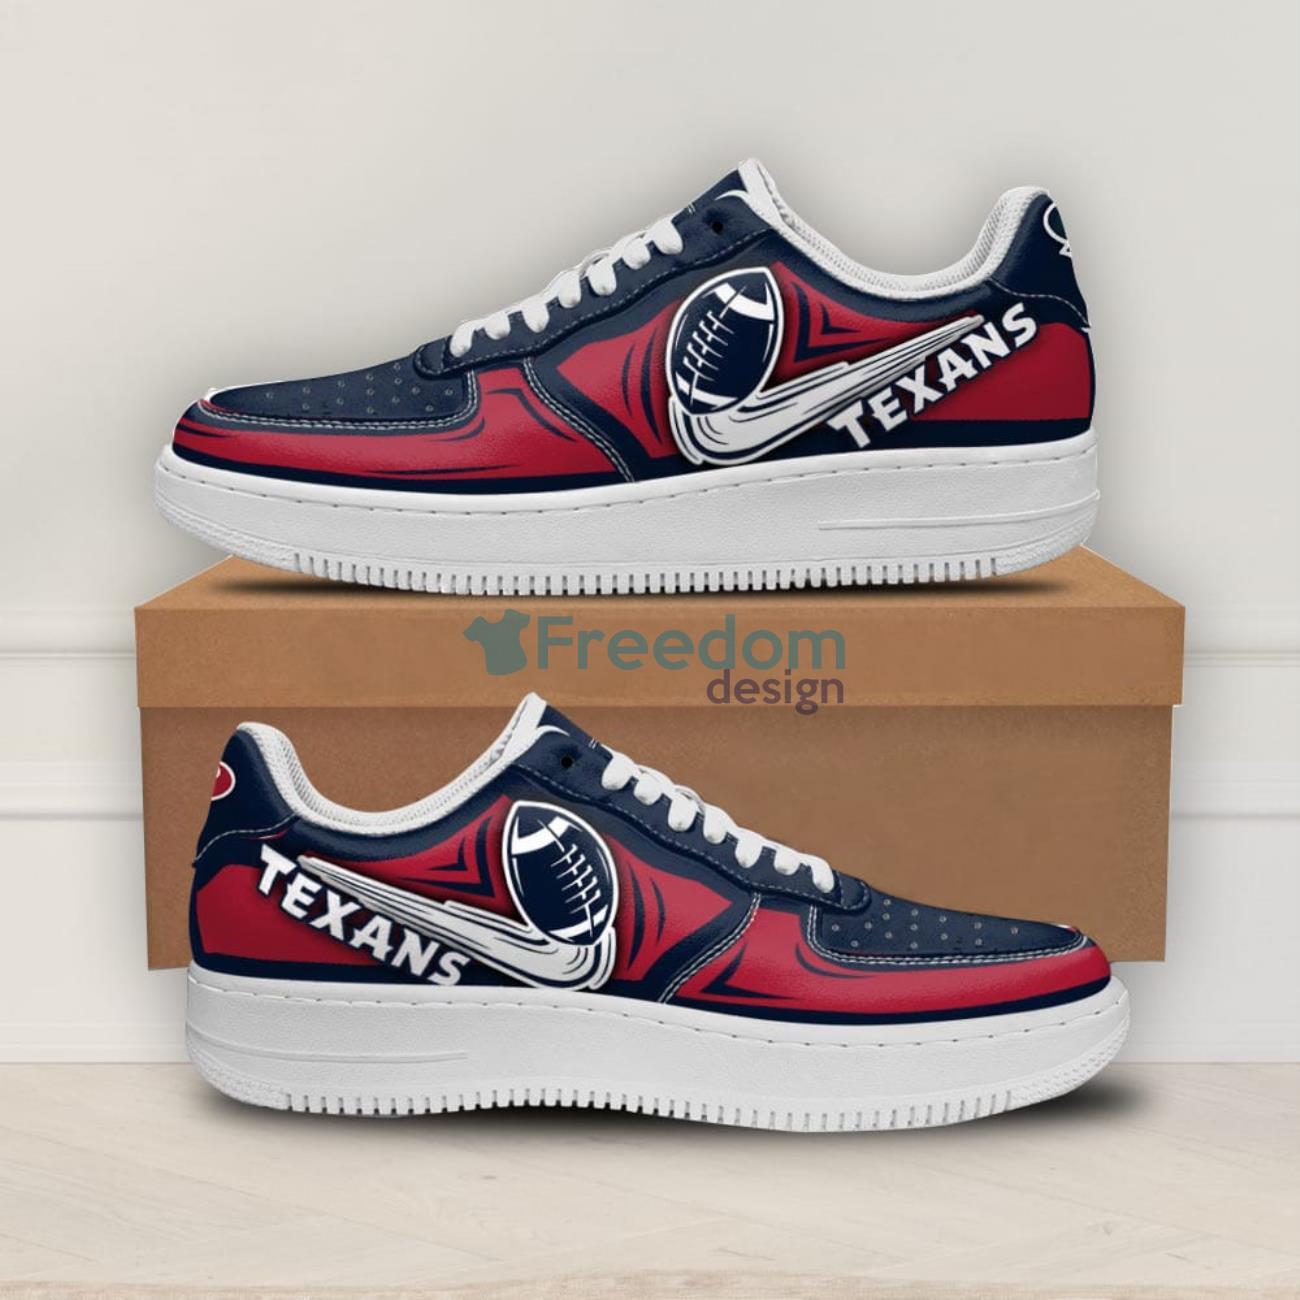 Houston Texans Air Shoes Sneakers For Fans - Freedomdesign